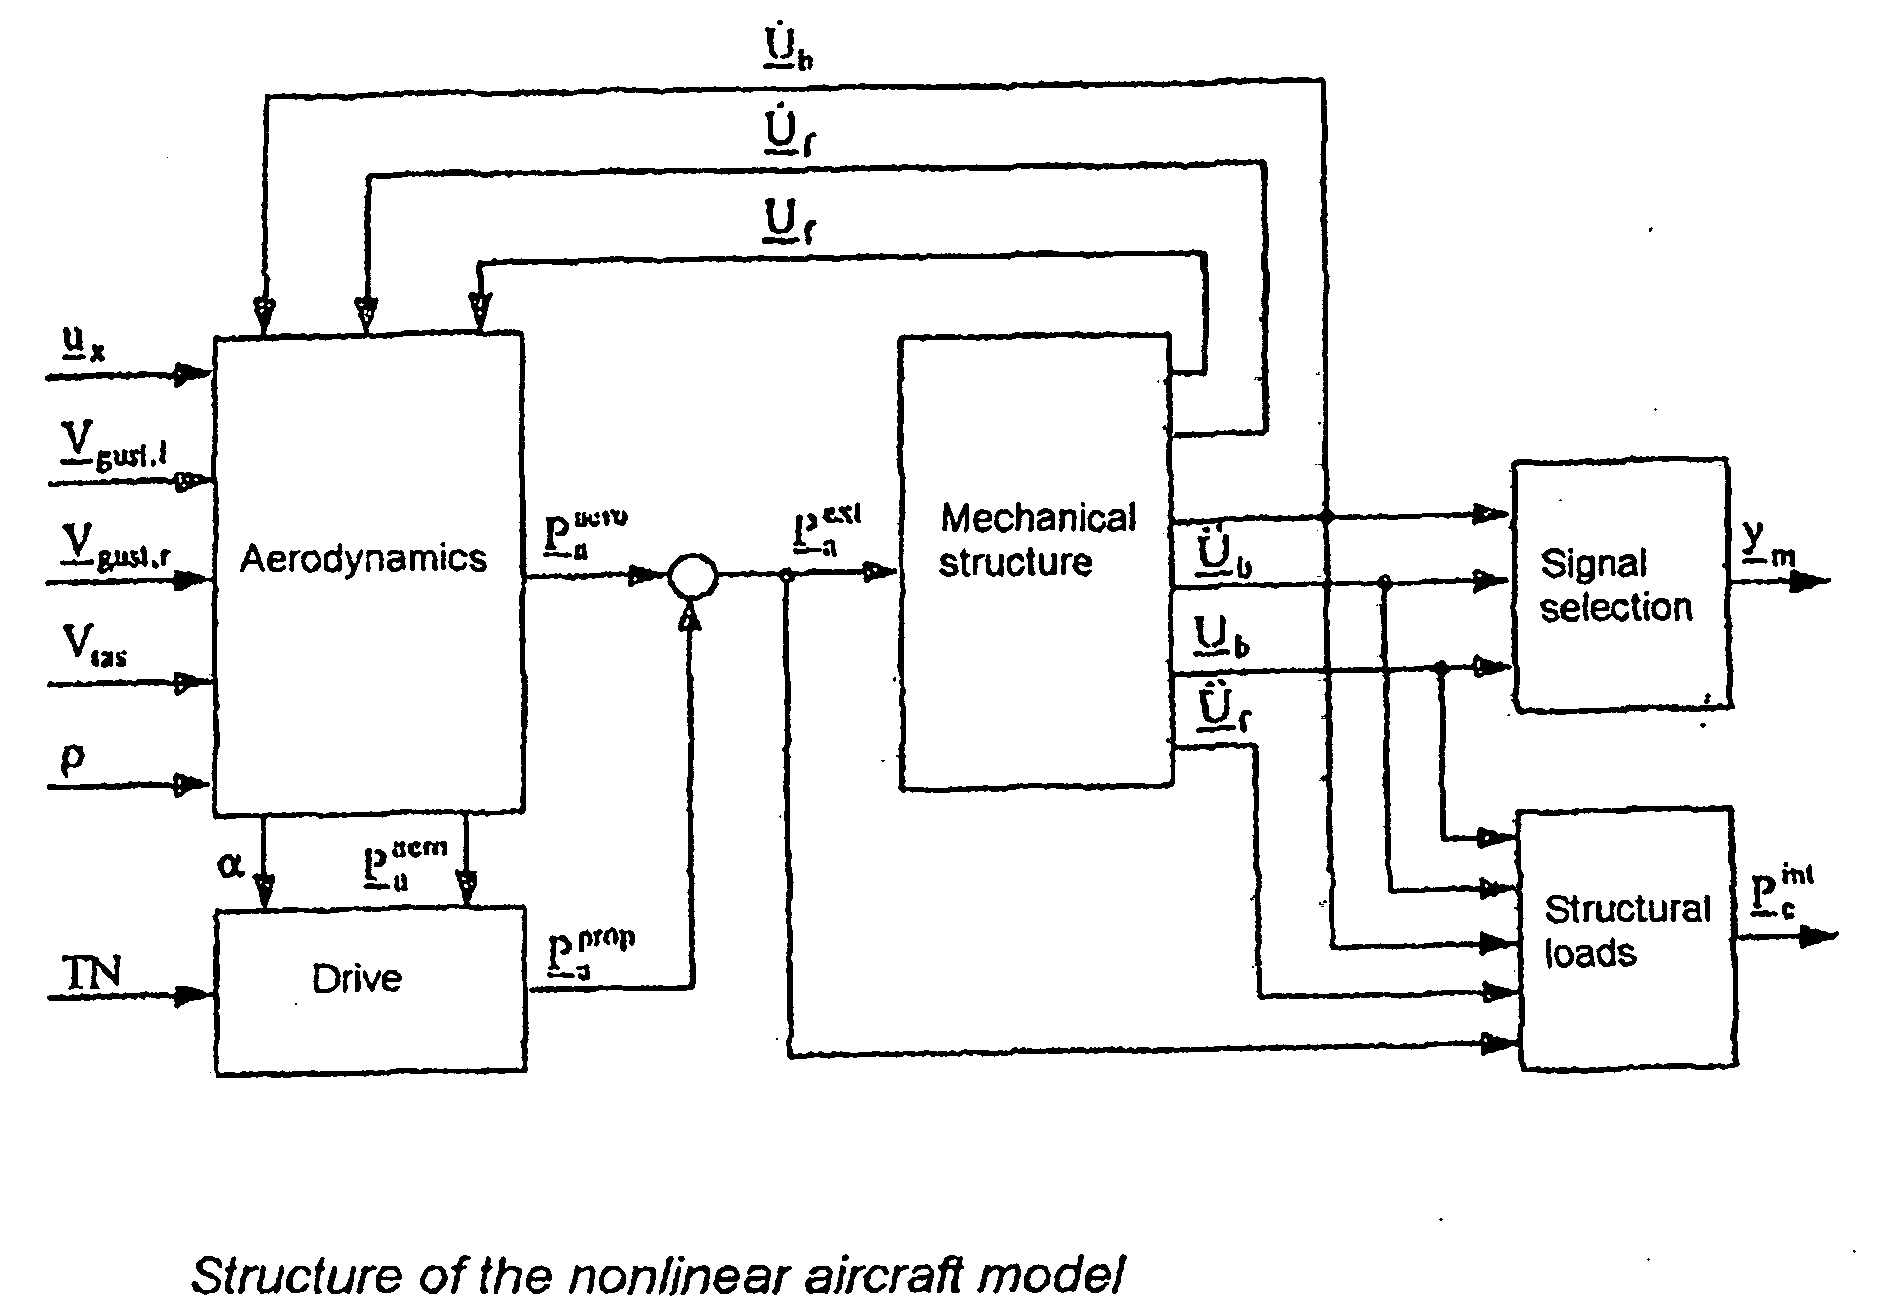 Method for Reconstructing Gusts and Structural Loads at Aircraft, in Particular Passenger Aircraft